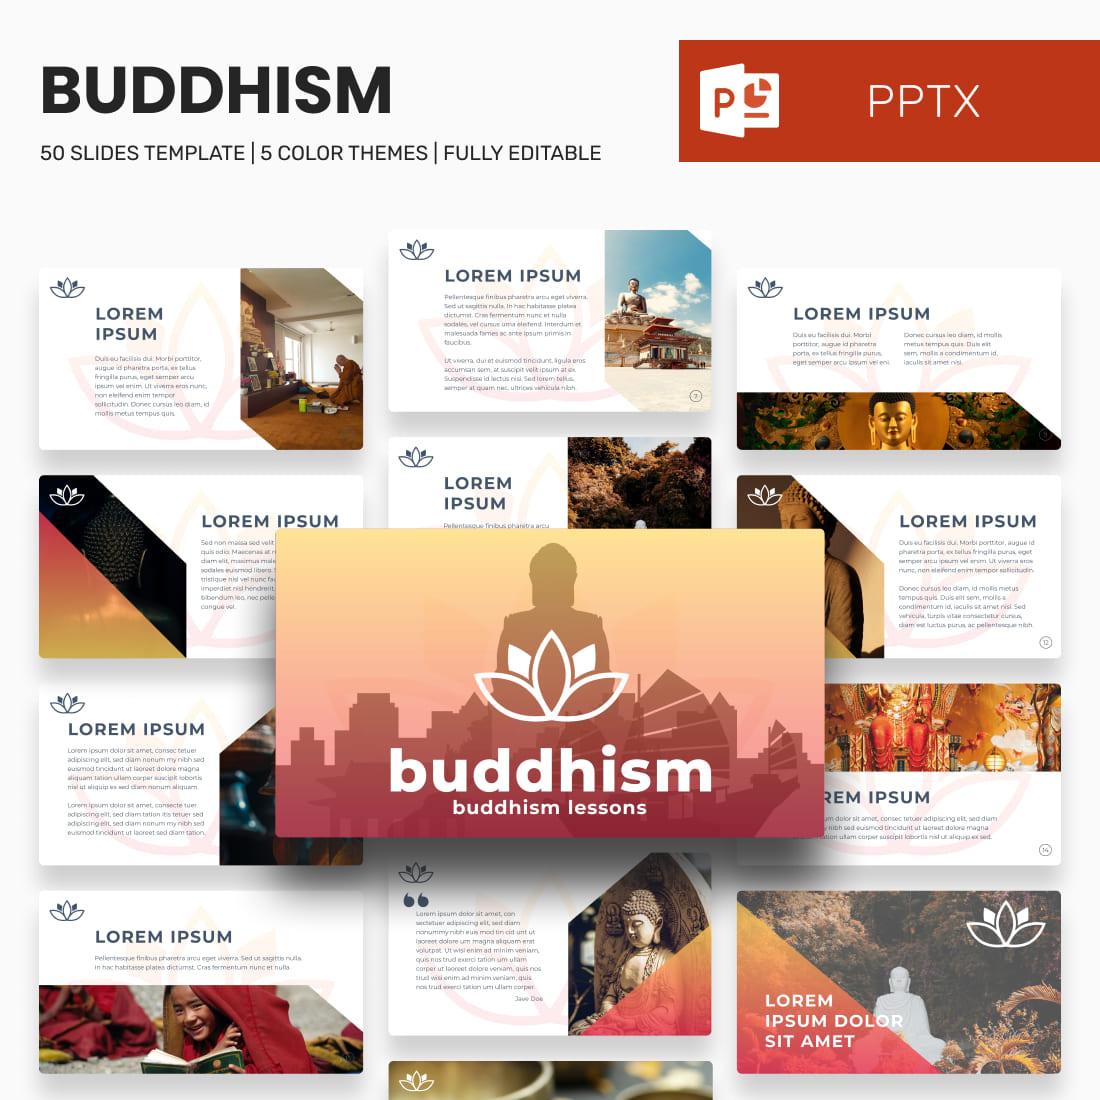 Buddhism powerpoint template.